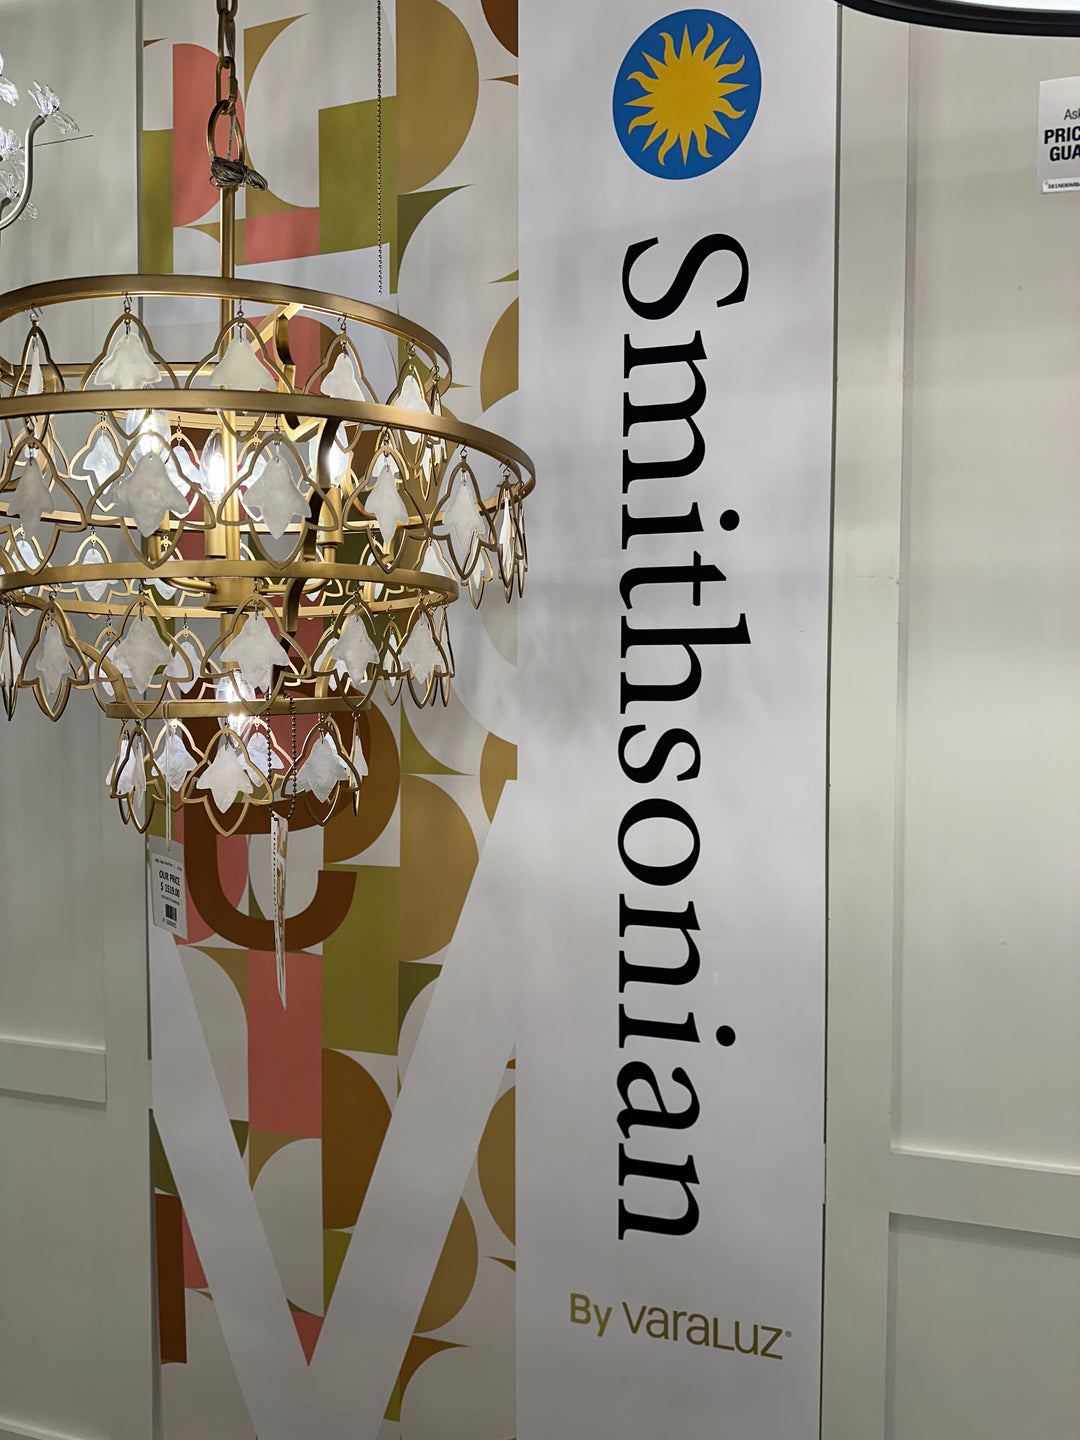 Shedding Light on our Journey: The Smithsonian by Varaluz Gallery at Rensen House of Lights